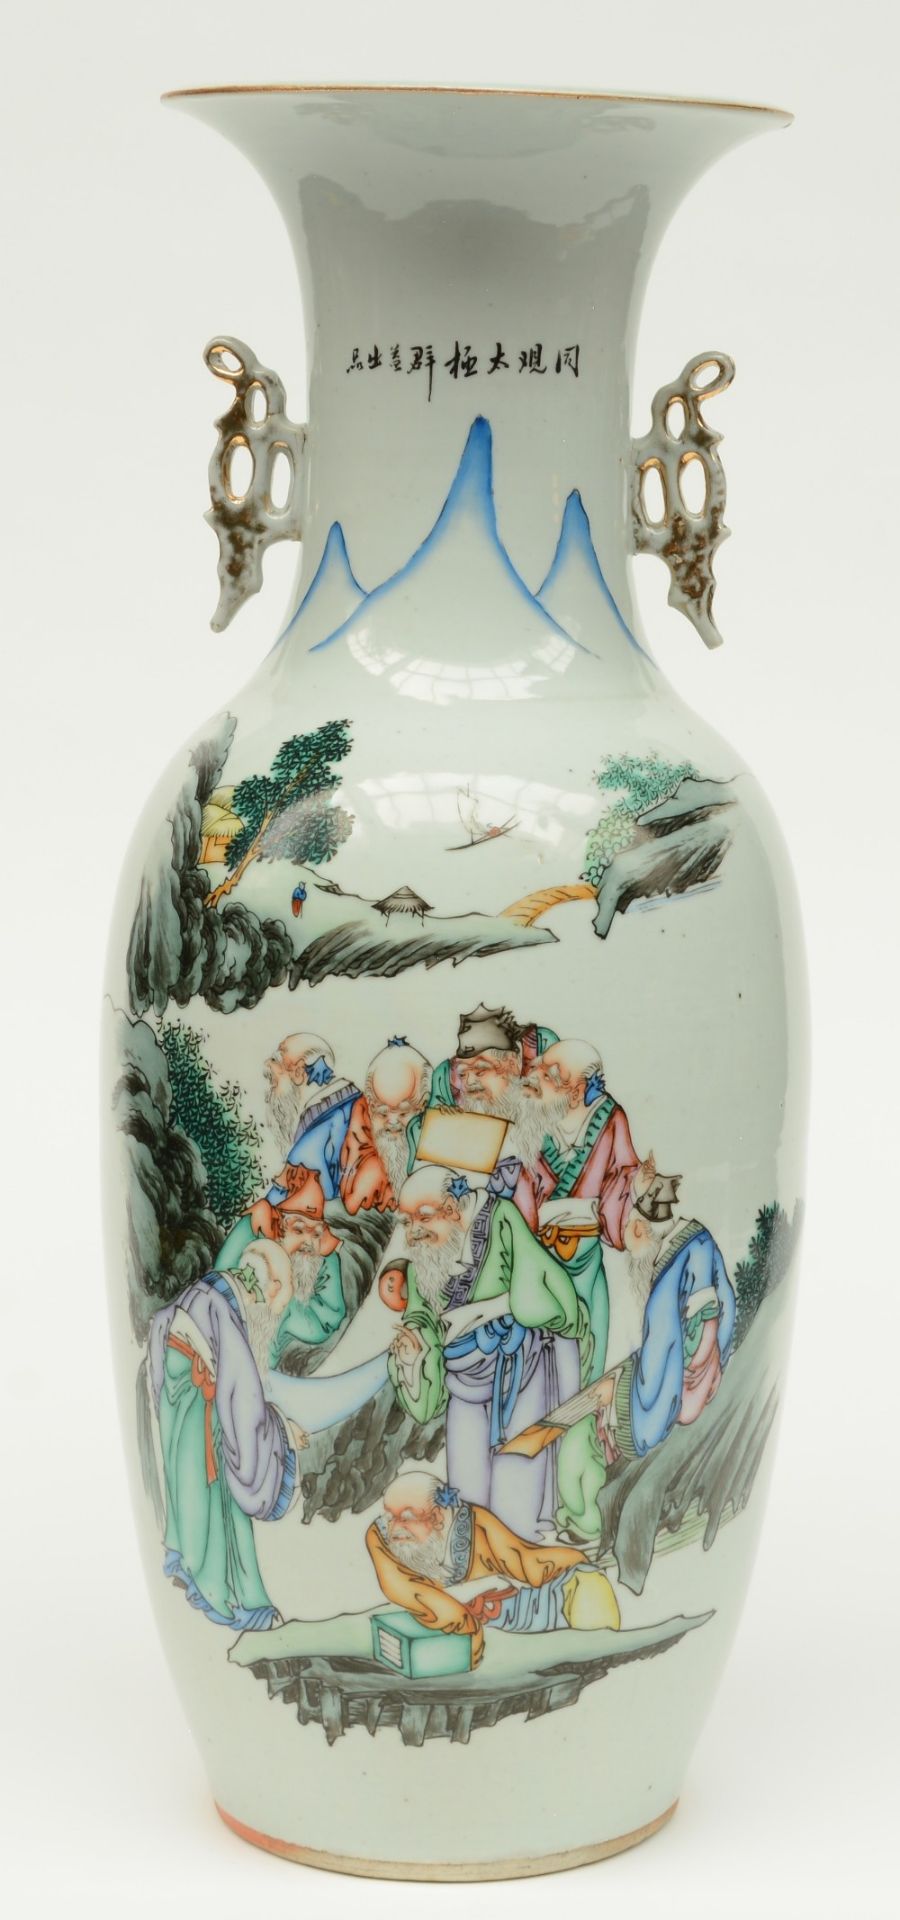 A Chinese polychrome decorated vase depicting scolars in a river landscape, H 58 cm (firing faults